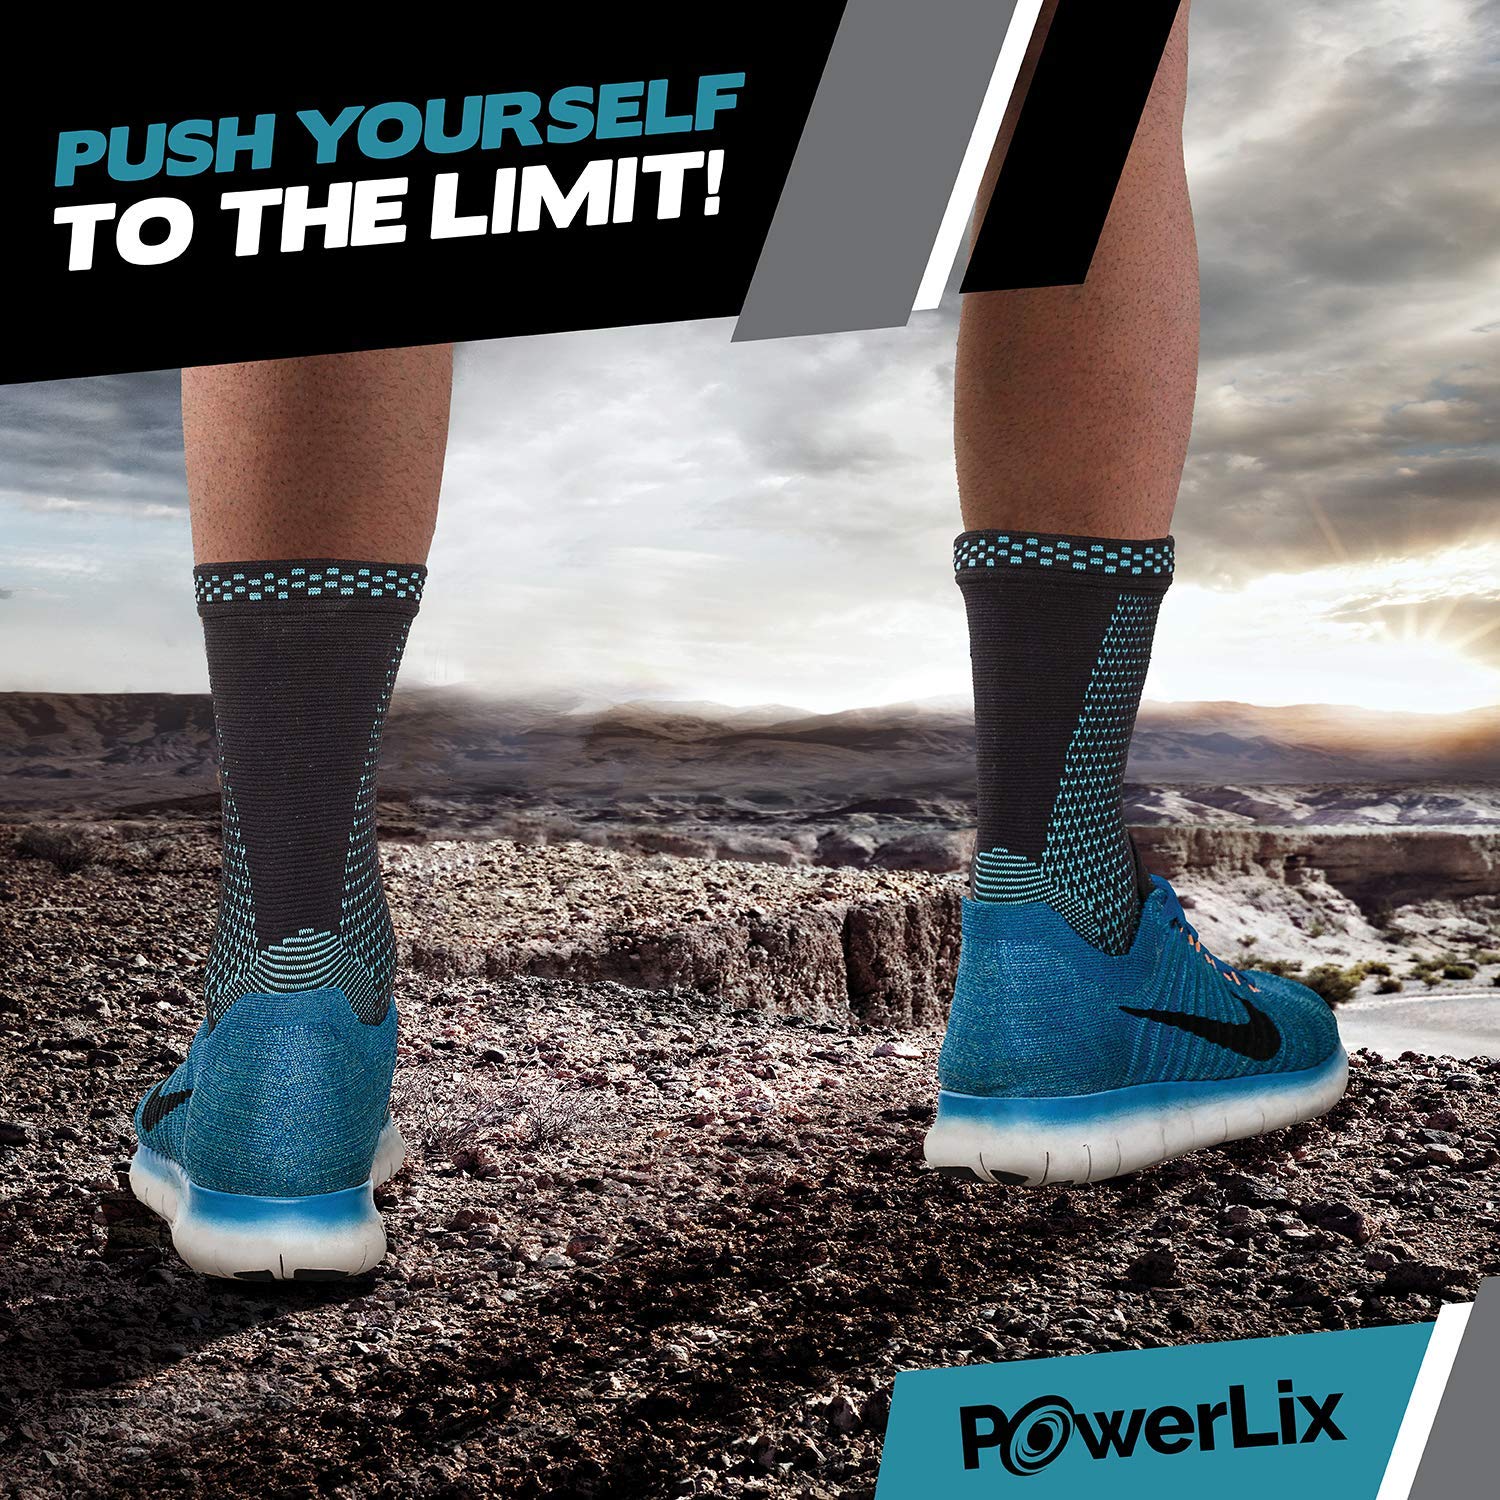 Blue and black fabric ankle braces worn on a model. Top text reads "Push yourself to the limit!" Lower text reads "Powerlix."